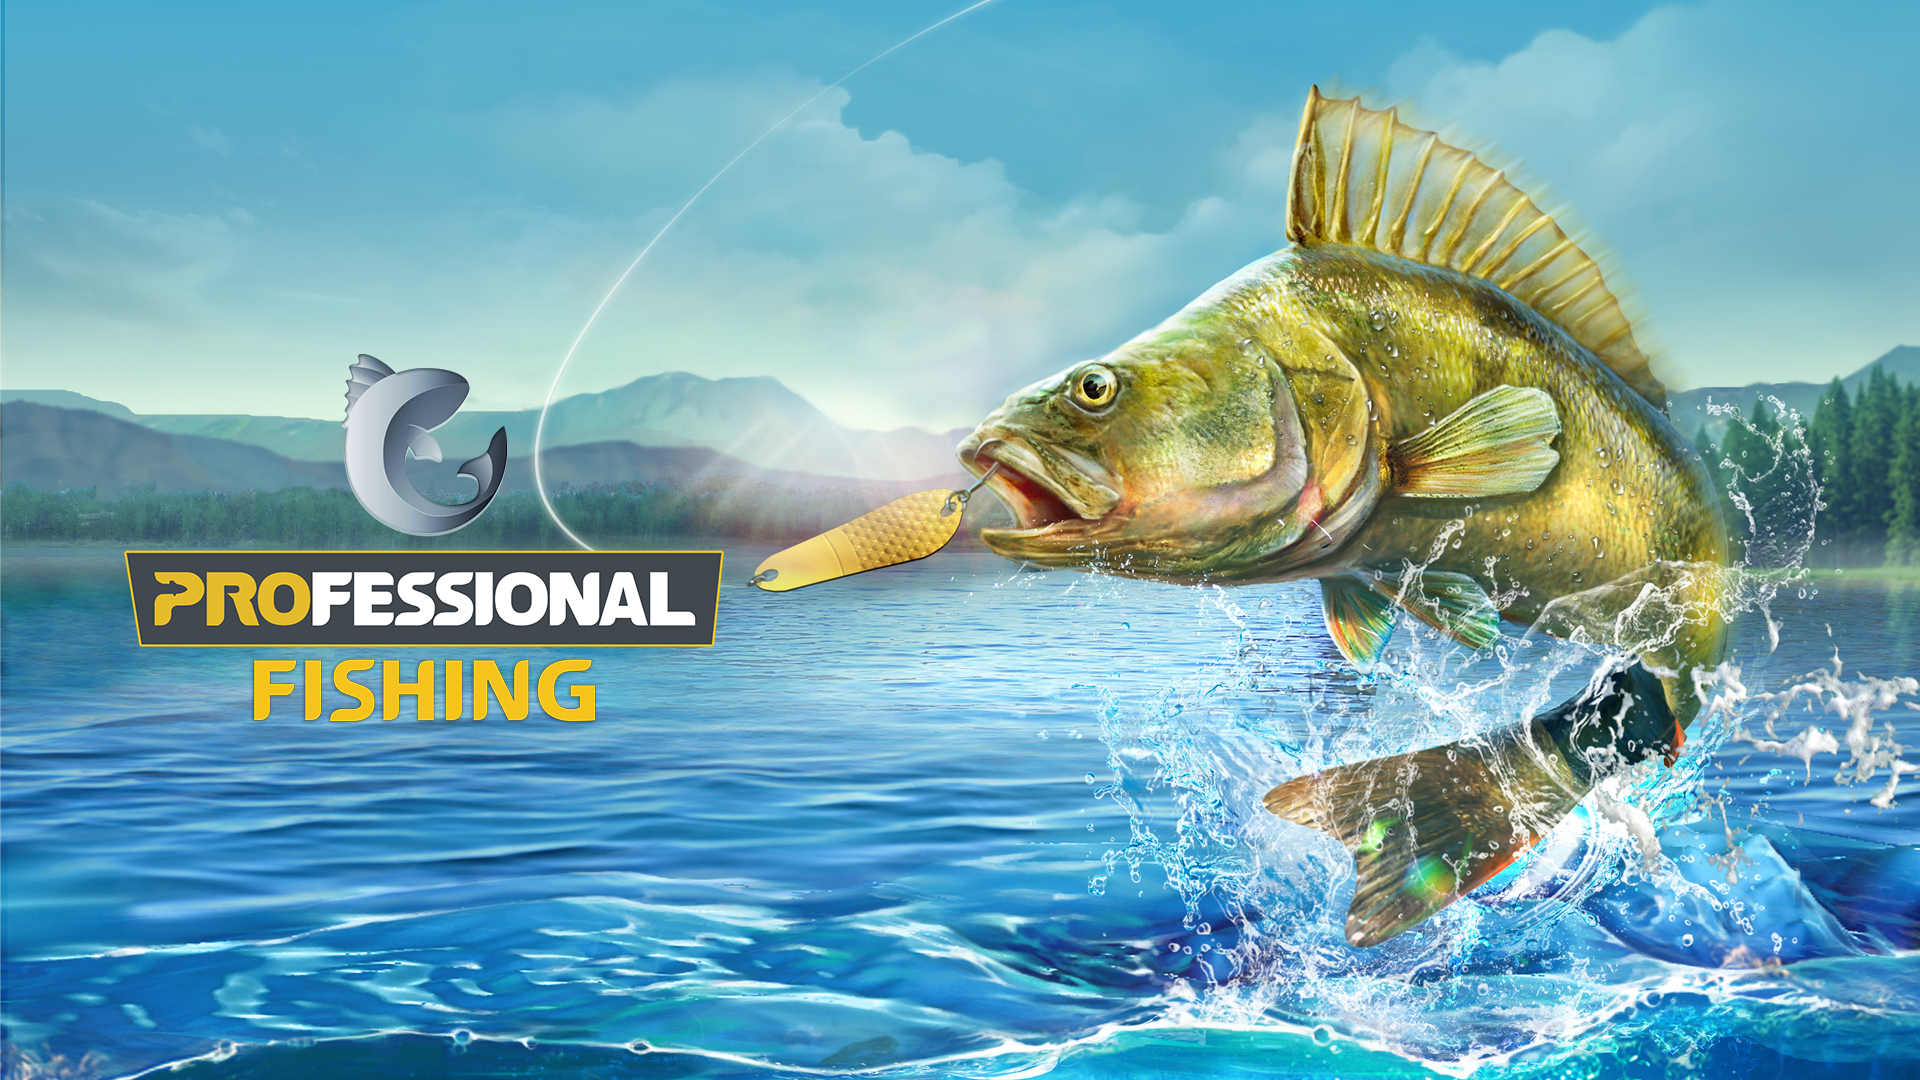 Professional Fishing now available on Steam for PC, new DLC released